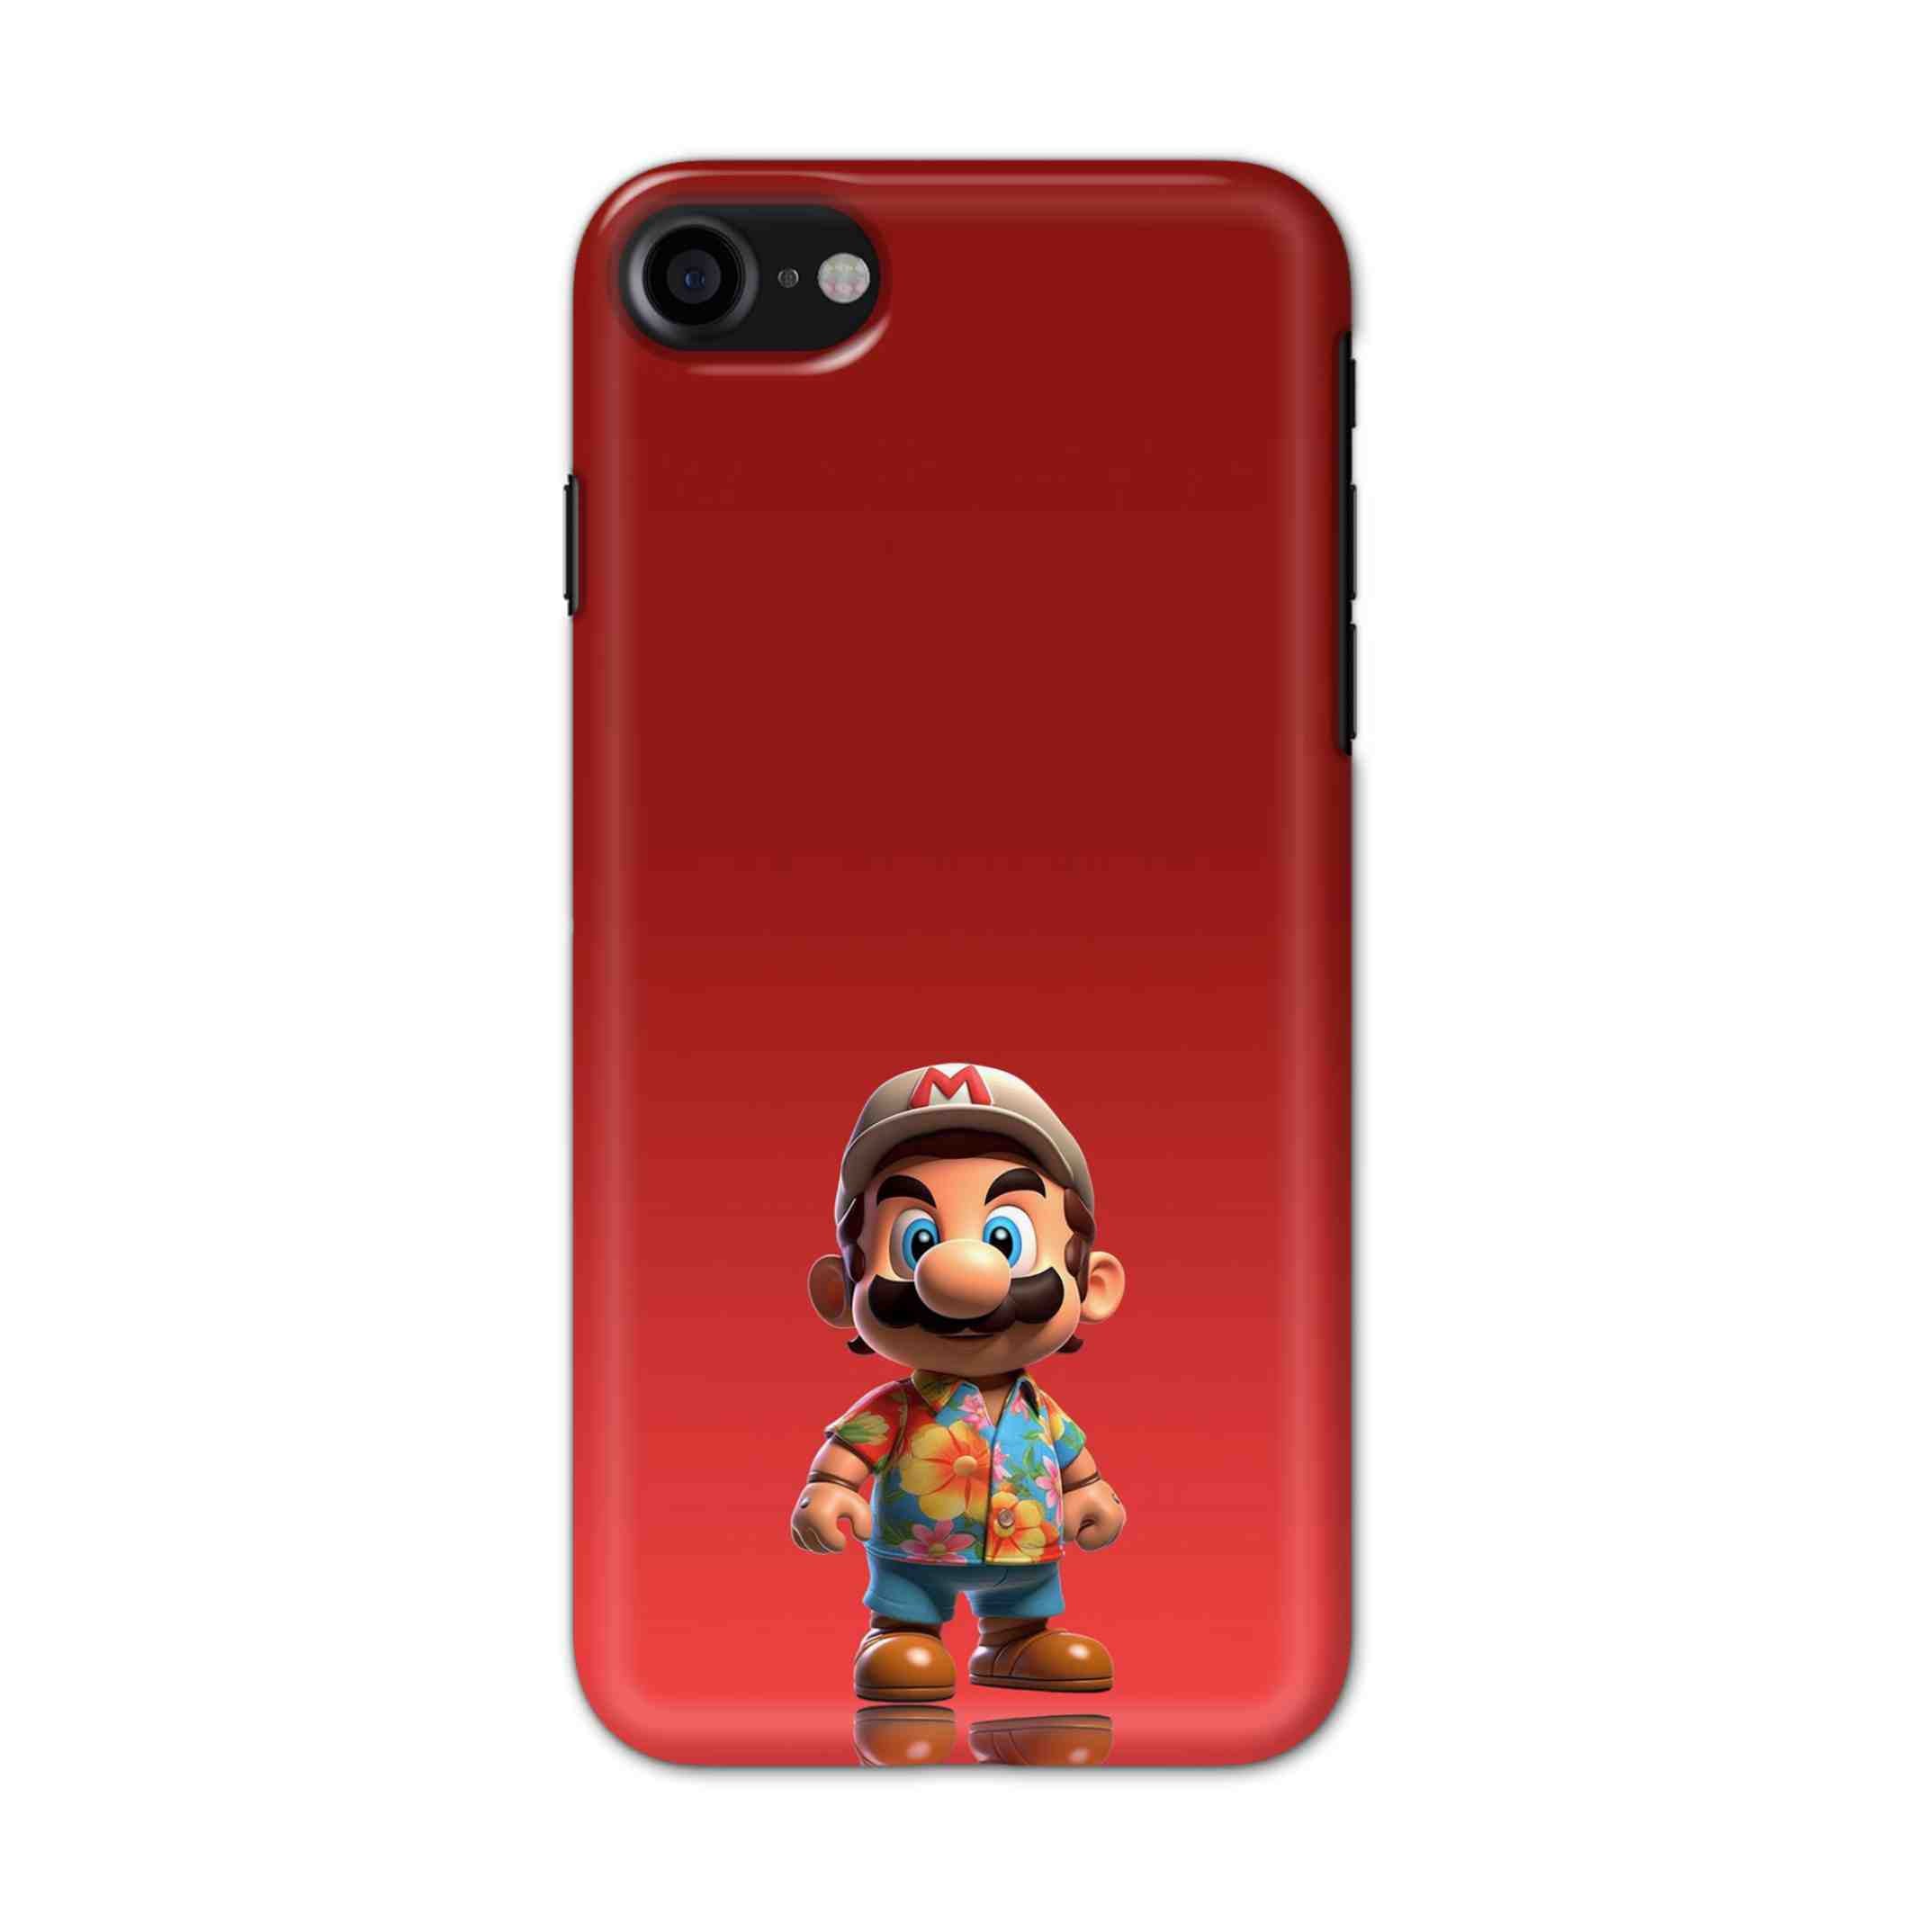 Buy Mario Hard Back Mobile Phone Case/Cover For iPhone 7 / 8 Online